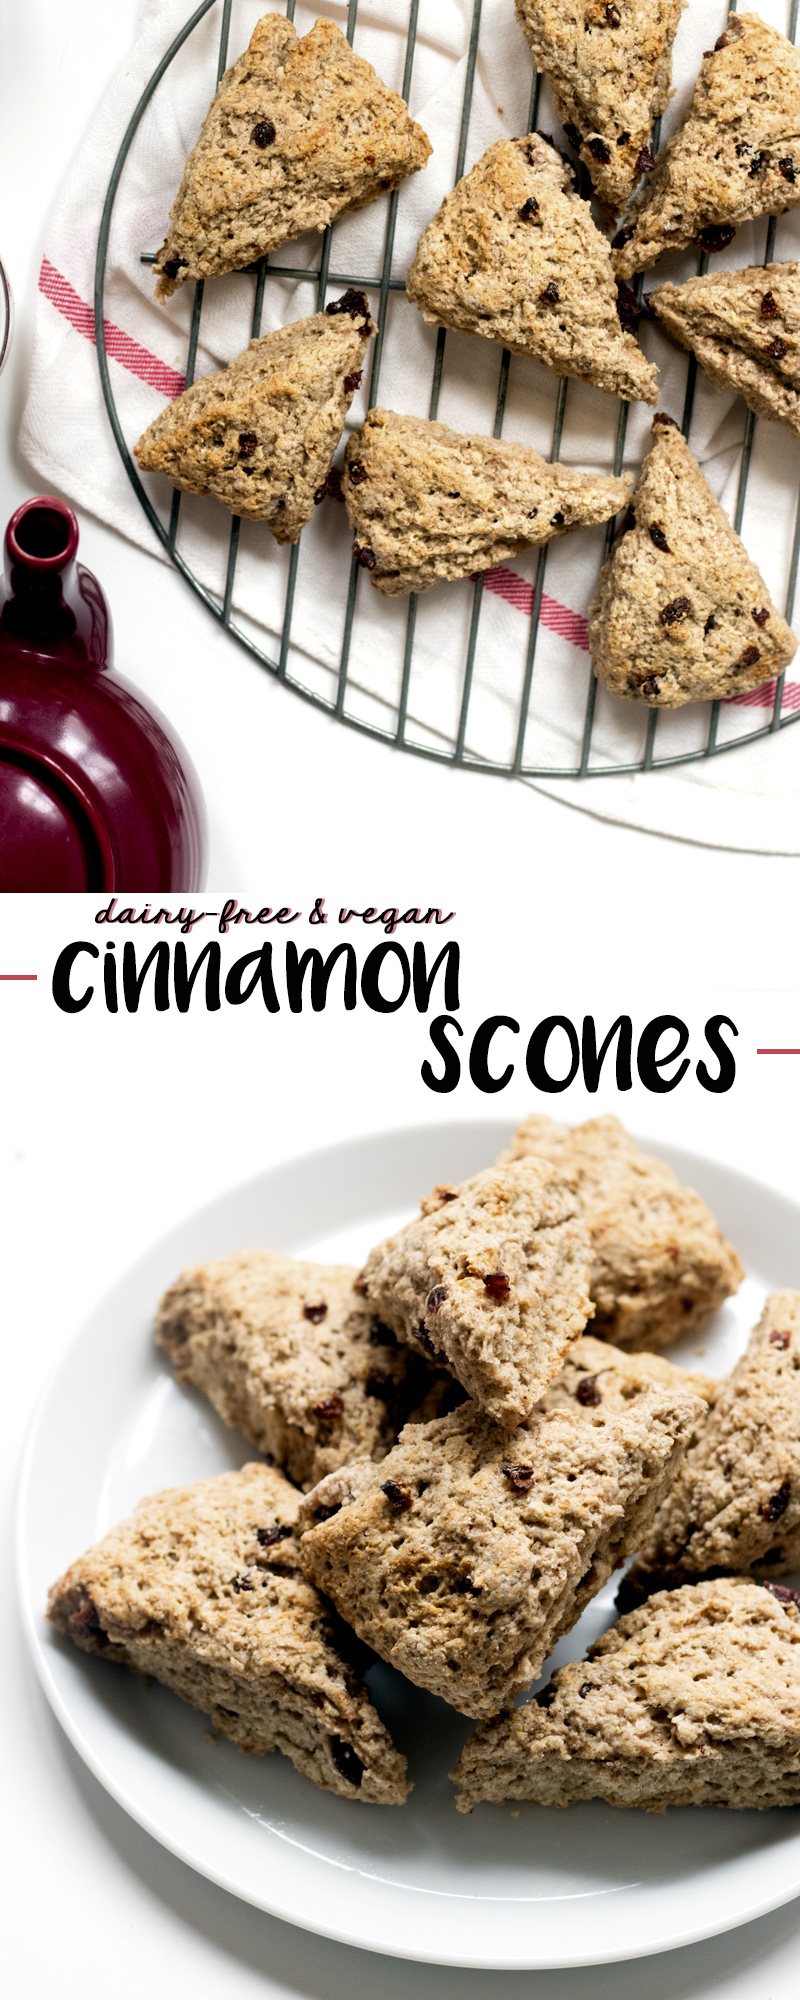 Vegan Cinnamon Scones Recipe - low fat, nutritious, dairy-free, nut-free and egg-free